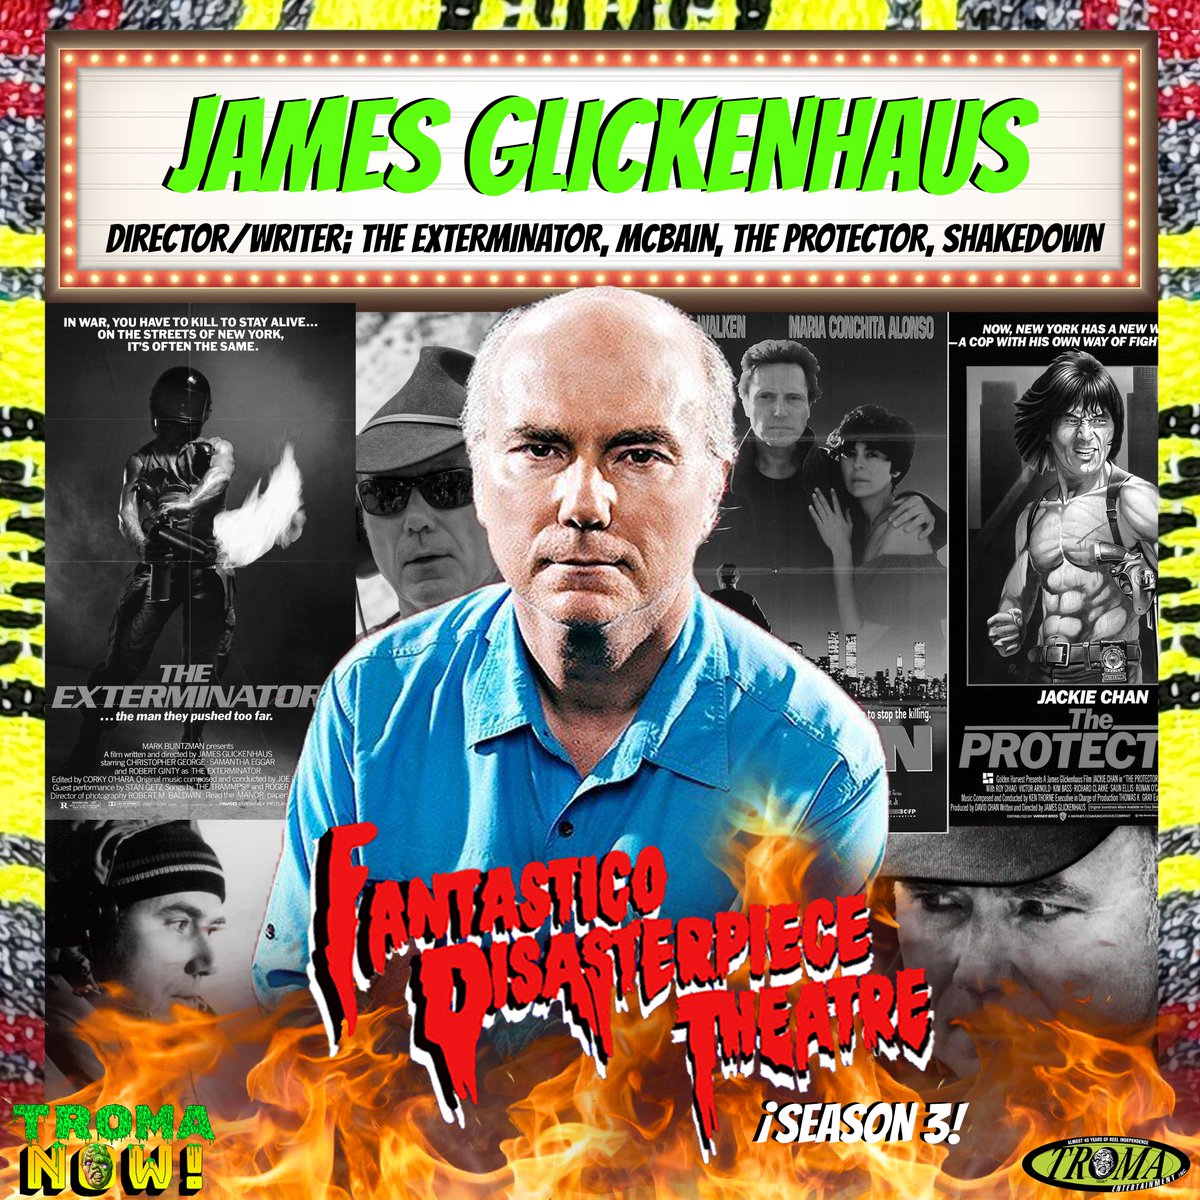 Time for the last guest announcement (We think!) for Season 3 on @TromaNOWApp! One of my favorite filmmakers of all time & super rad guy! I'm honored and privileged to announce the addition of James Glickenhaus to the new season! #MutantFam #HorrorCommunity #FantasticoOnTroma